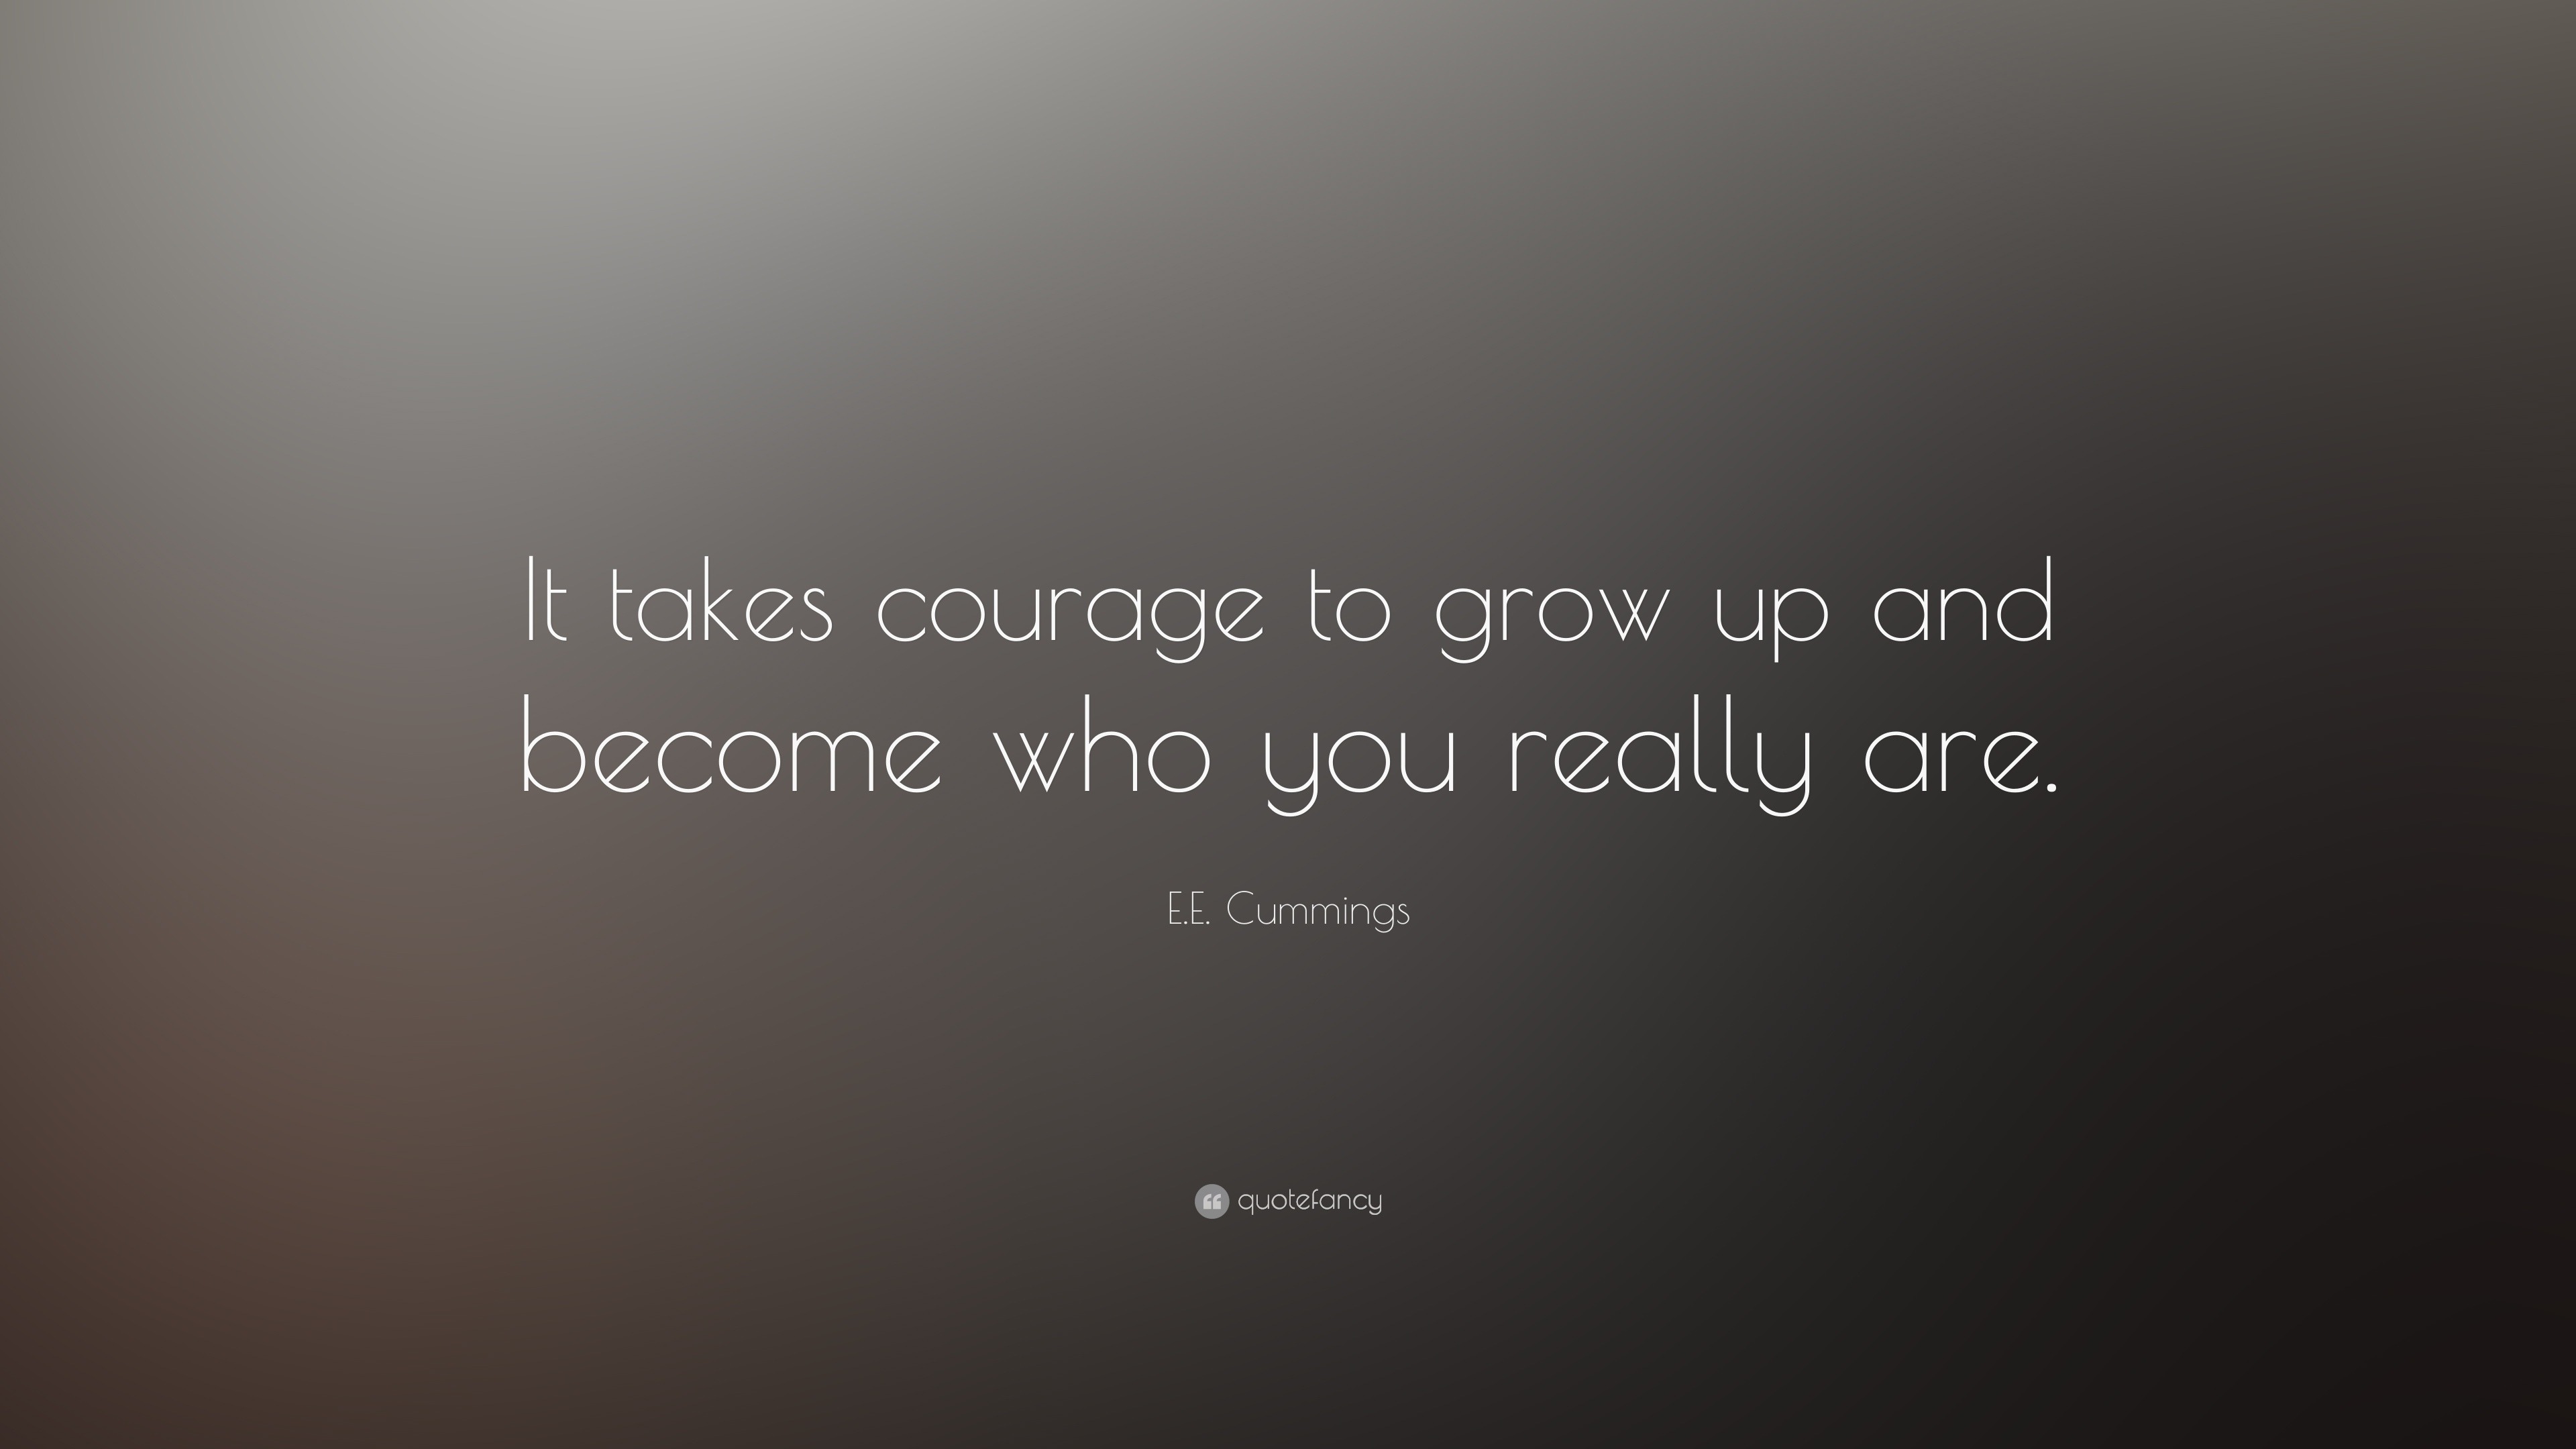 Image result for e e cummings quotes